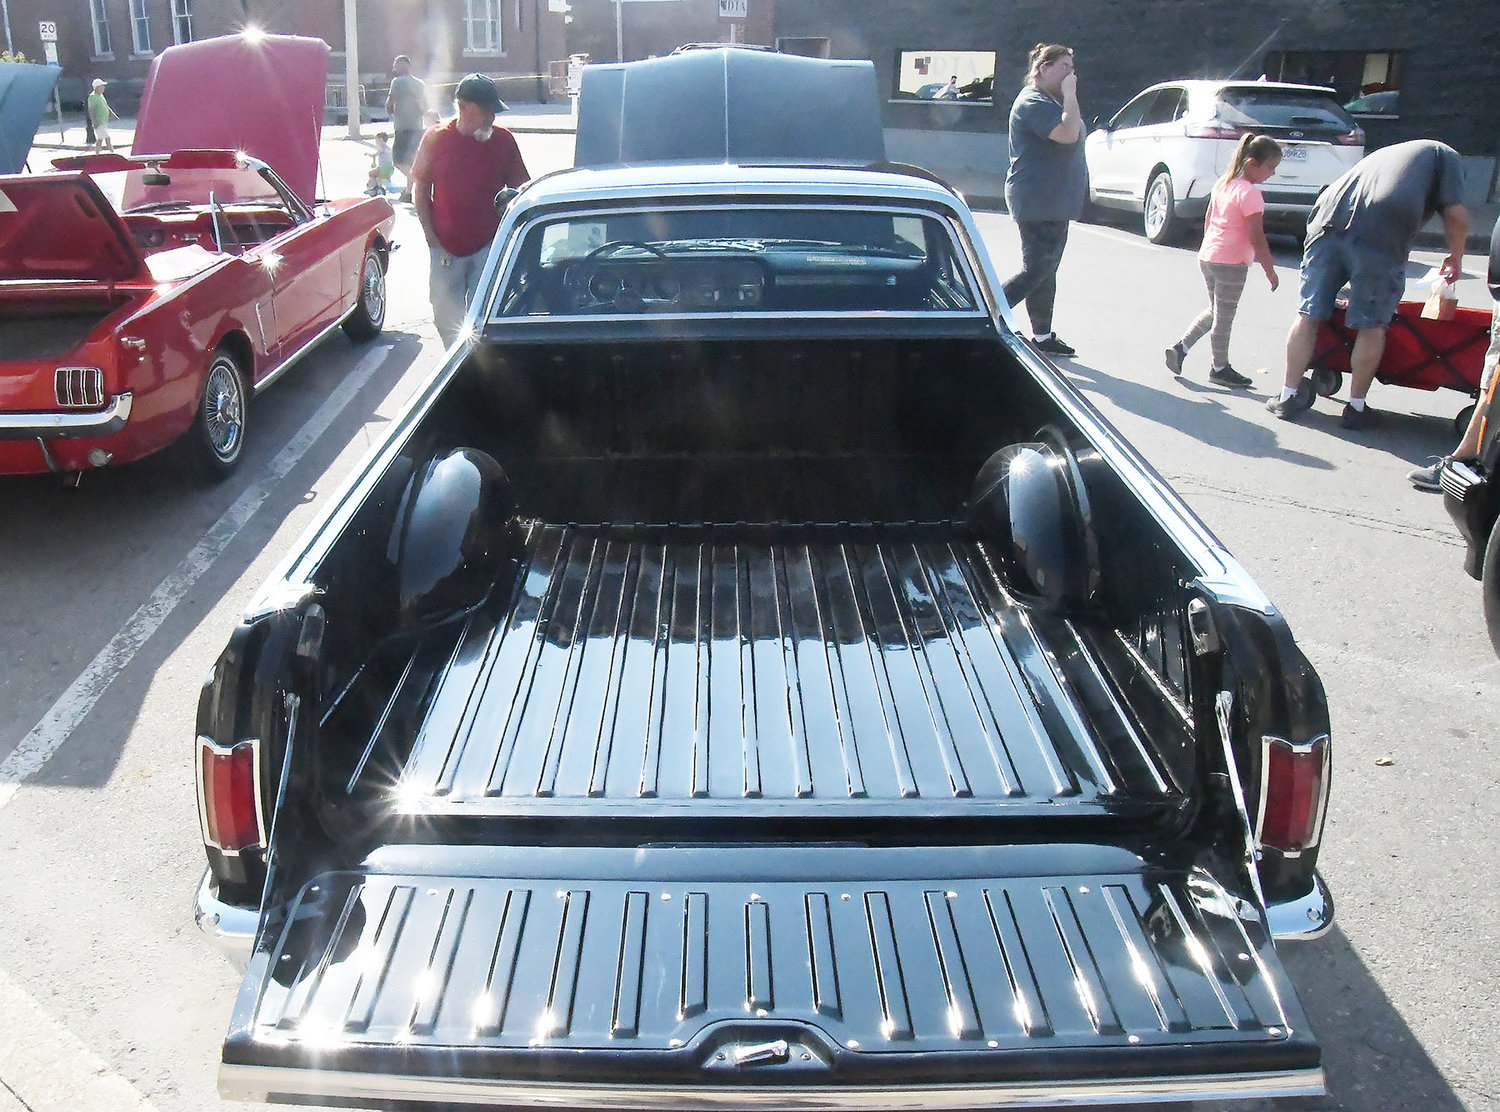 The distinctive view of a Chevrolet El Camino is certainly easy on the eyes. Don Foster owns this vehicle.